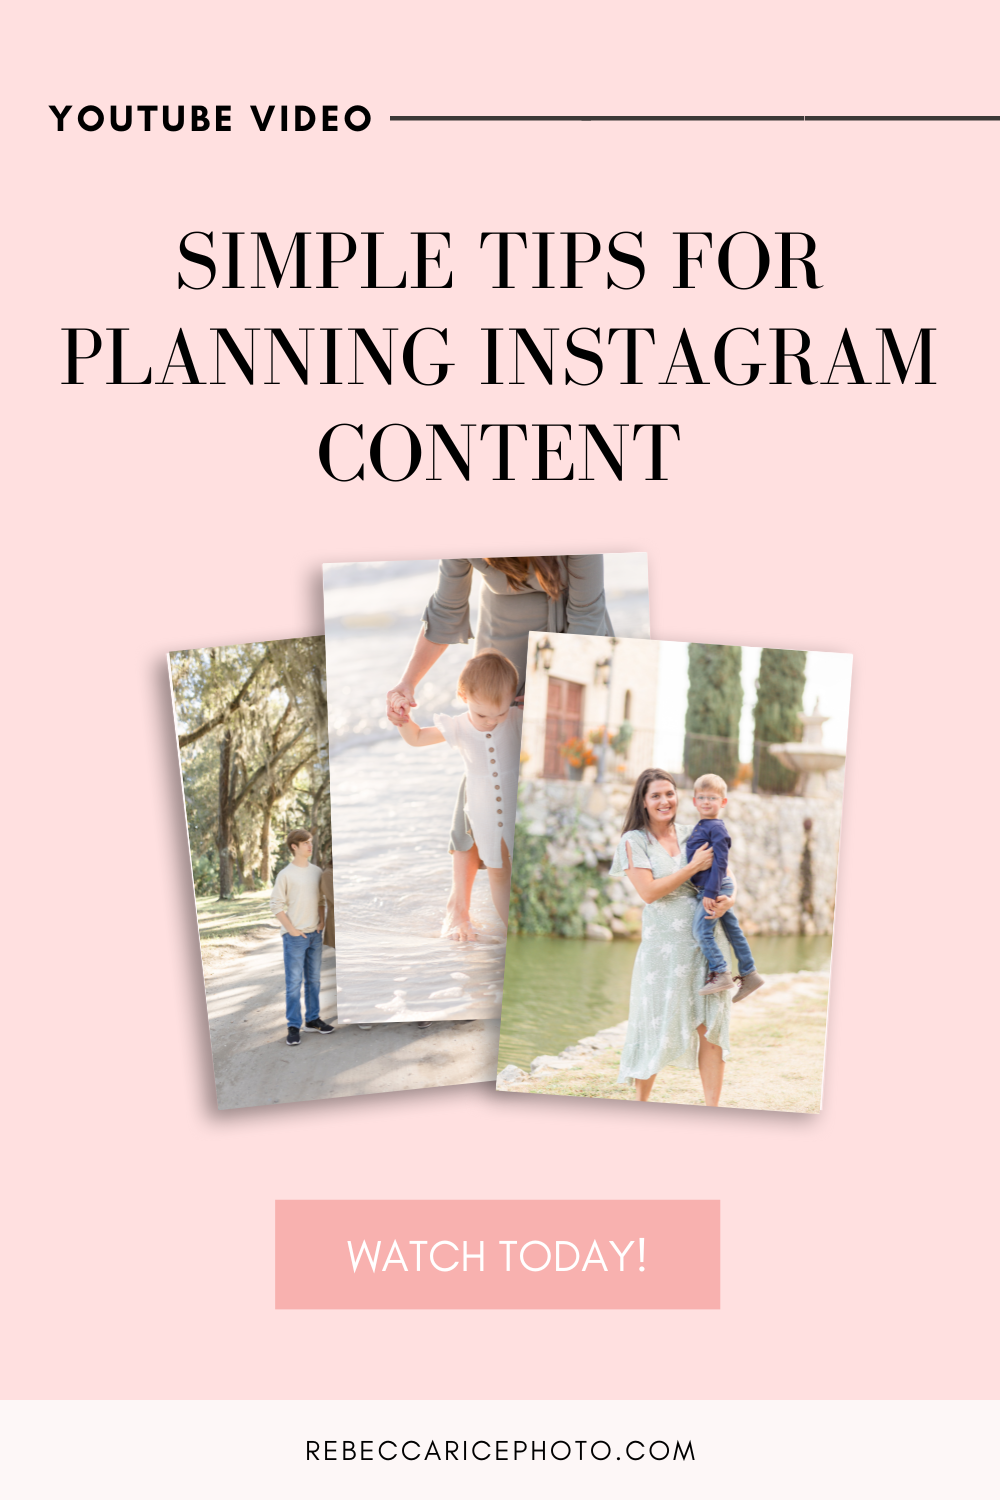 Simple Tips for Planning Instagram Content | Social Media Tips